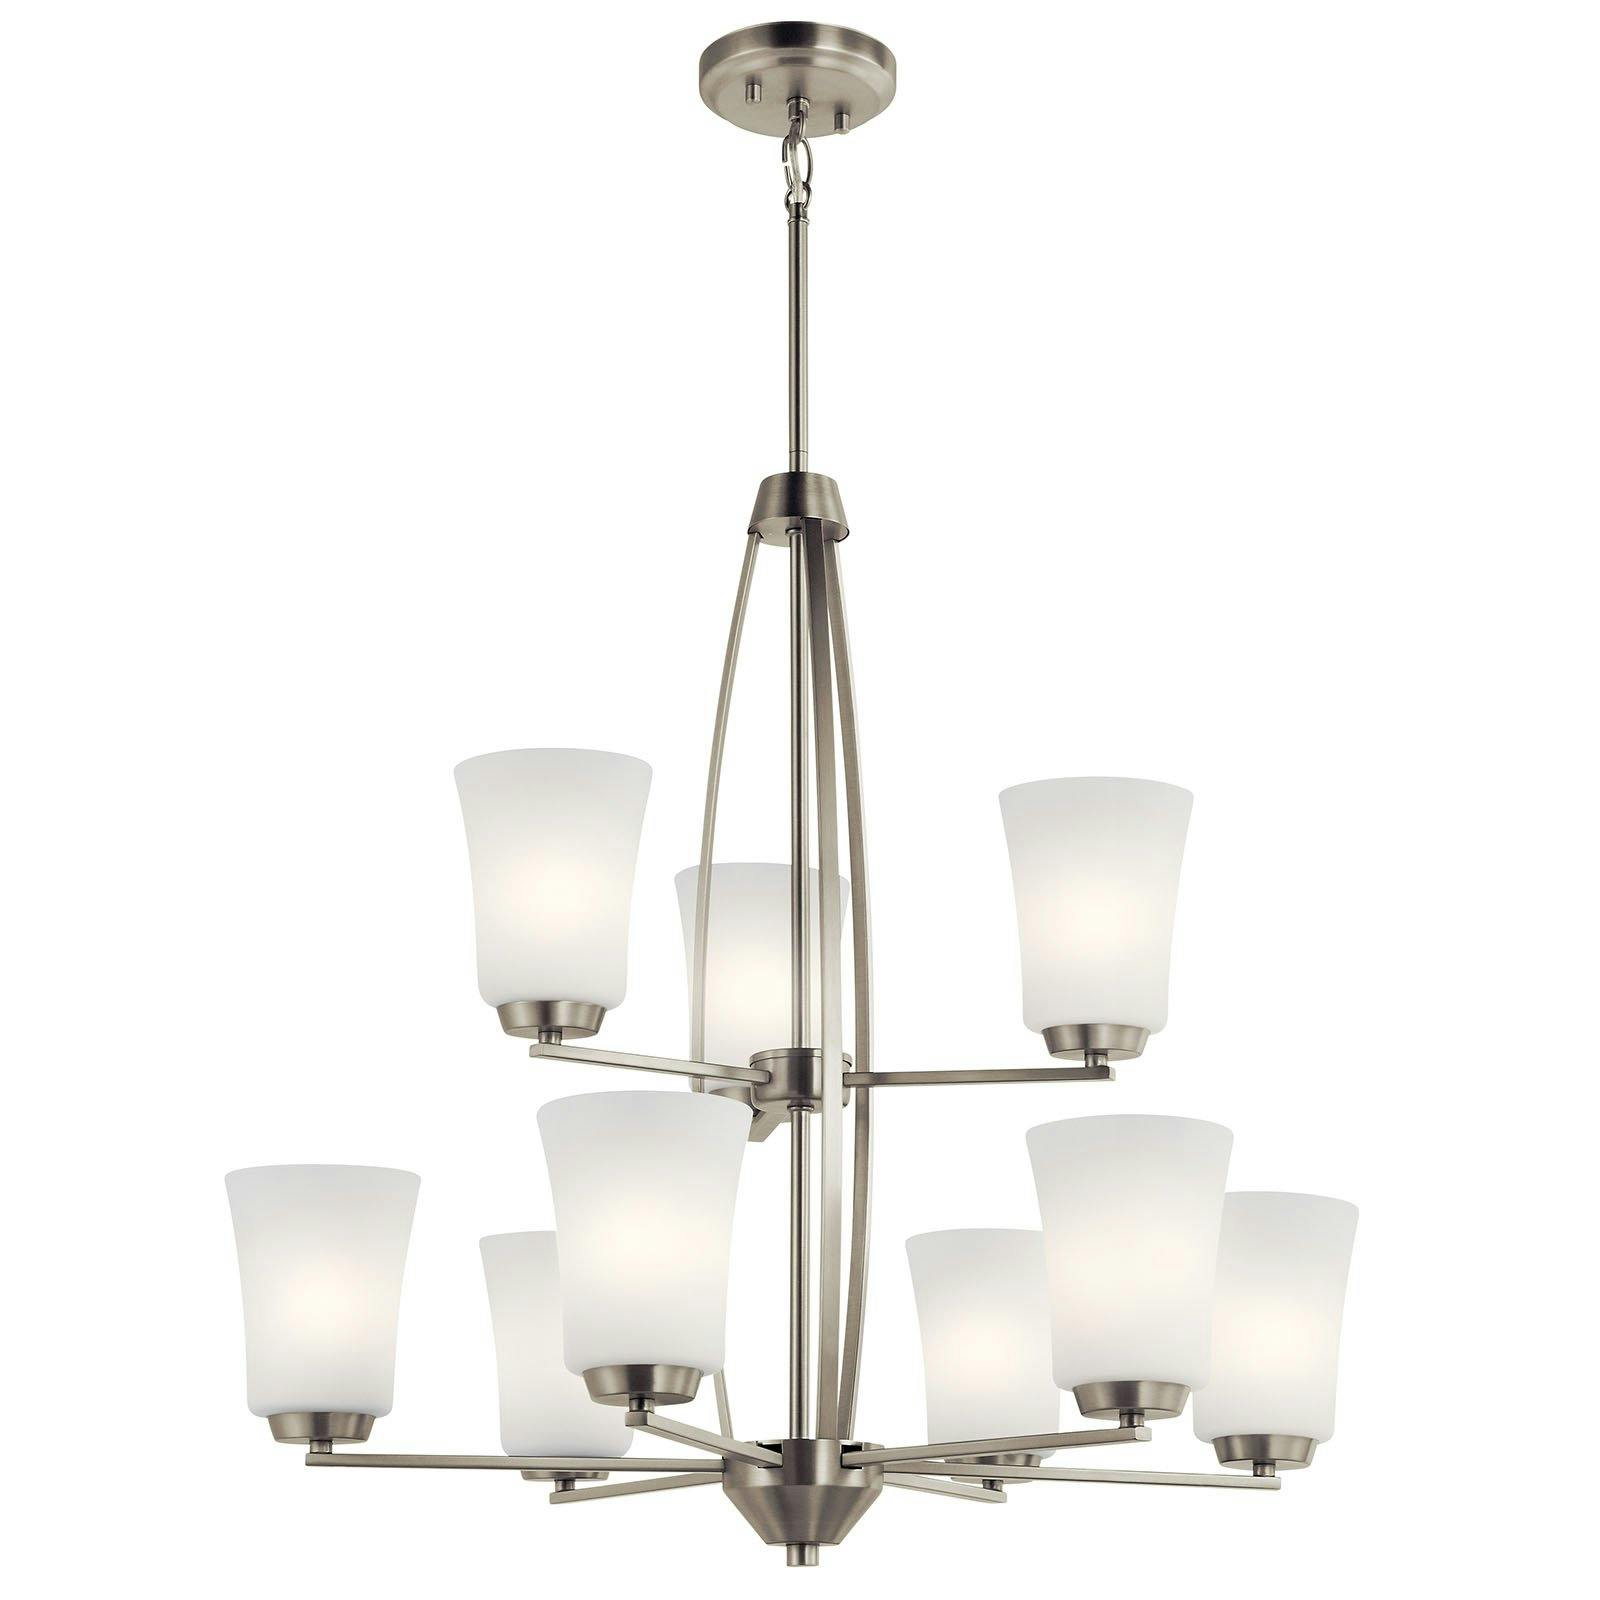 Tao 9 Light Chandelier Brushed Nickel on a white background